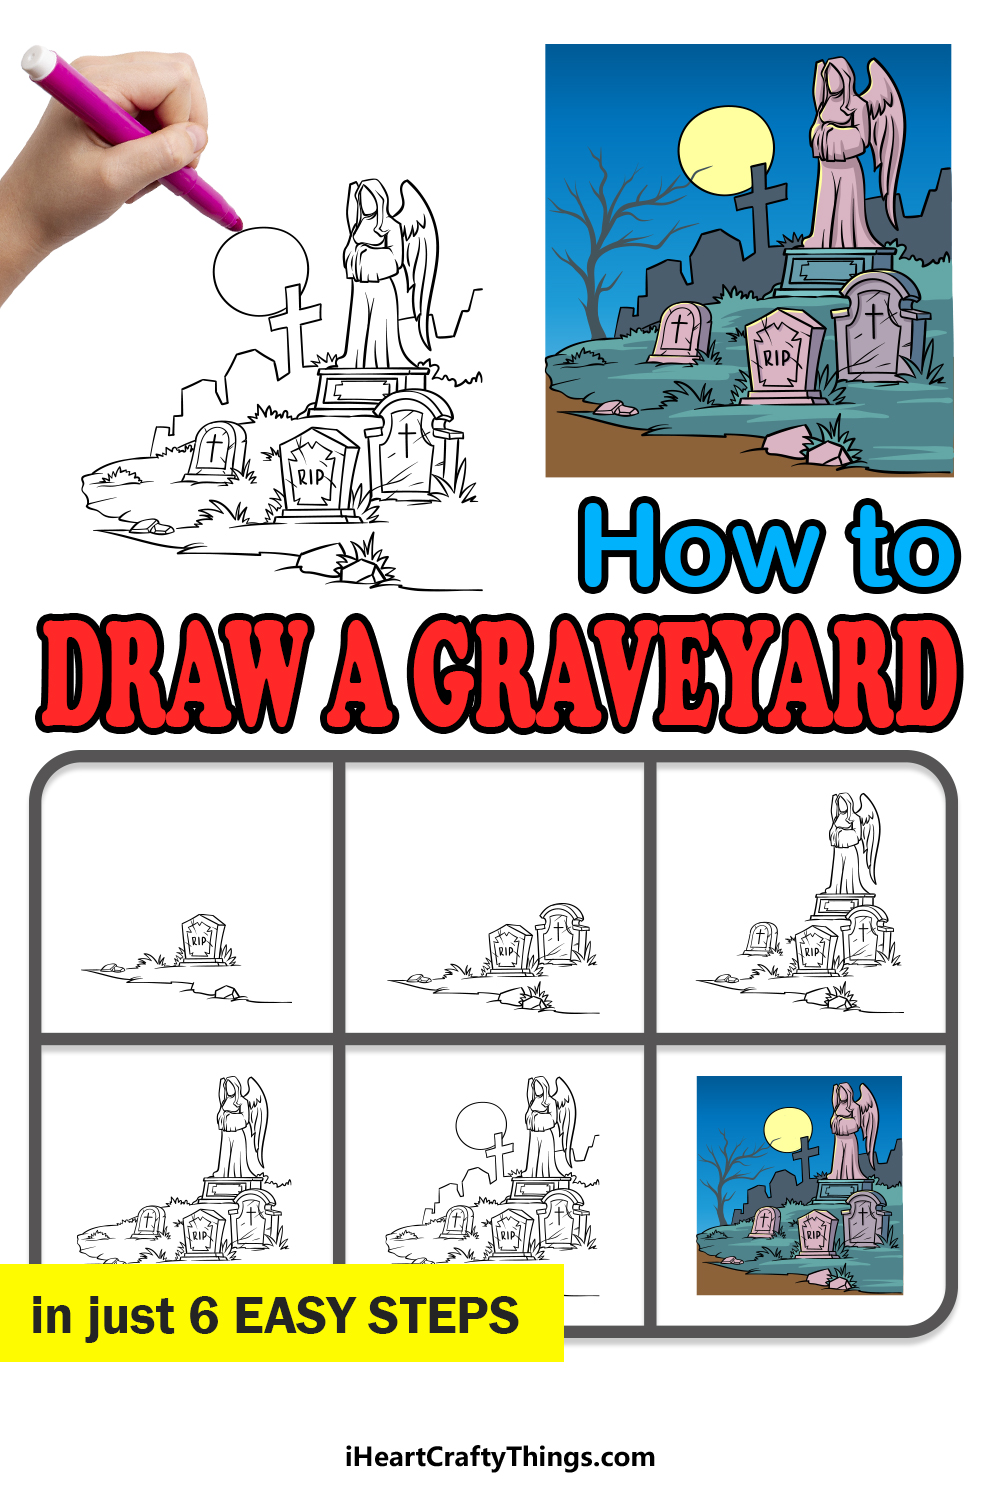 how to draw a Graveyard in 6 easy steps